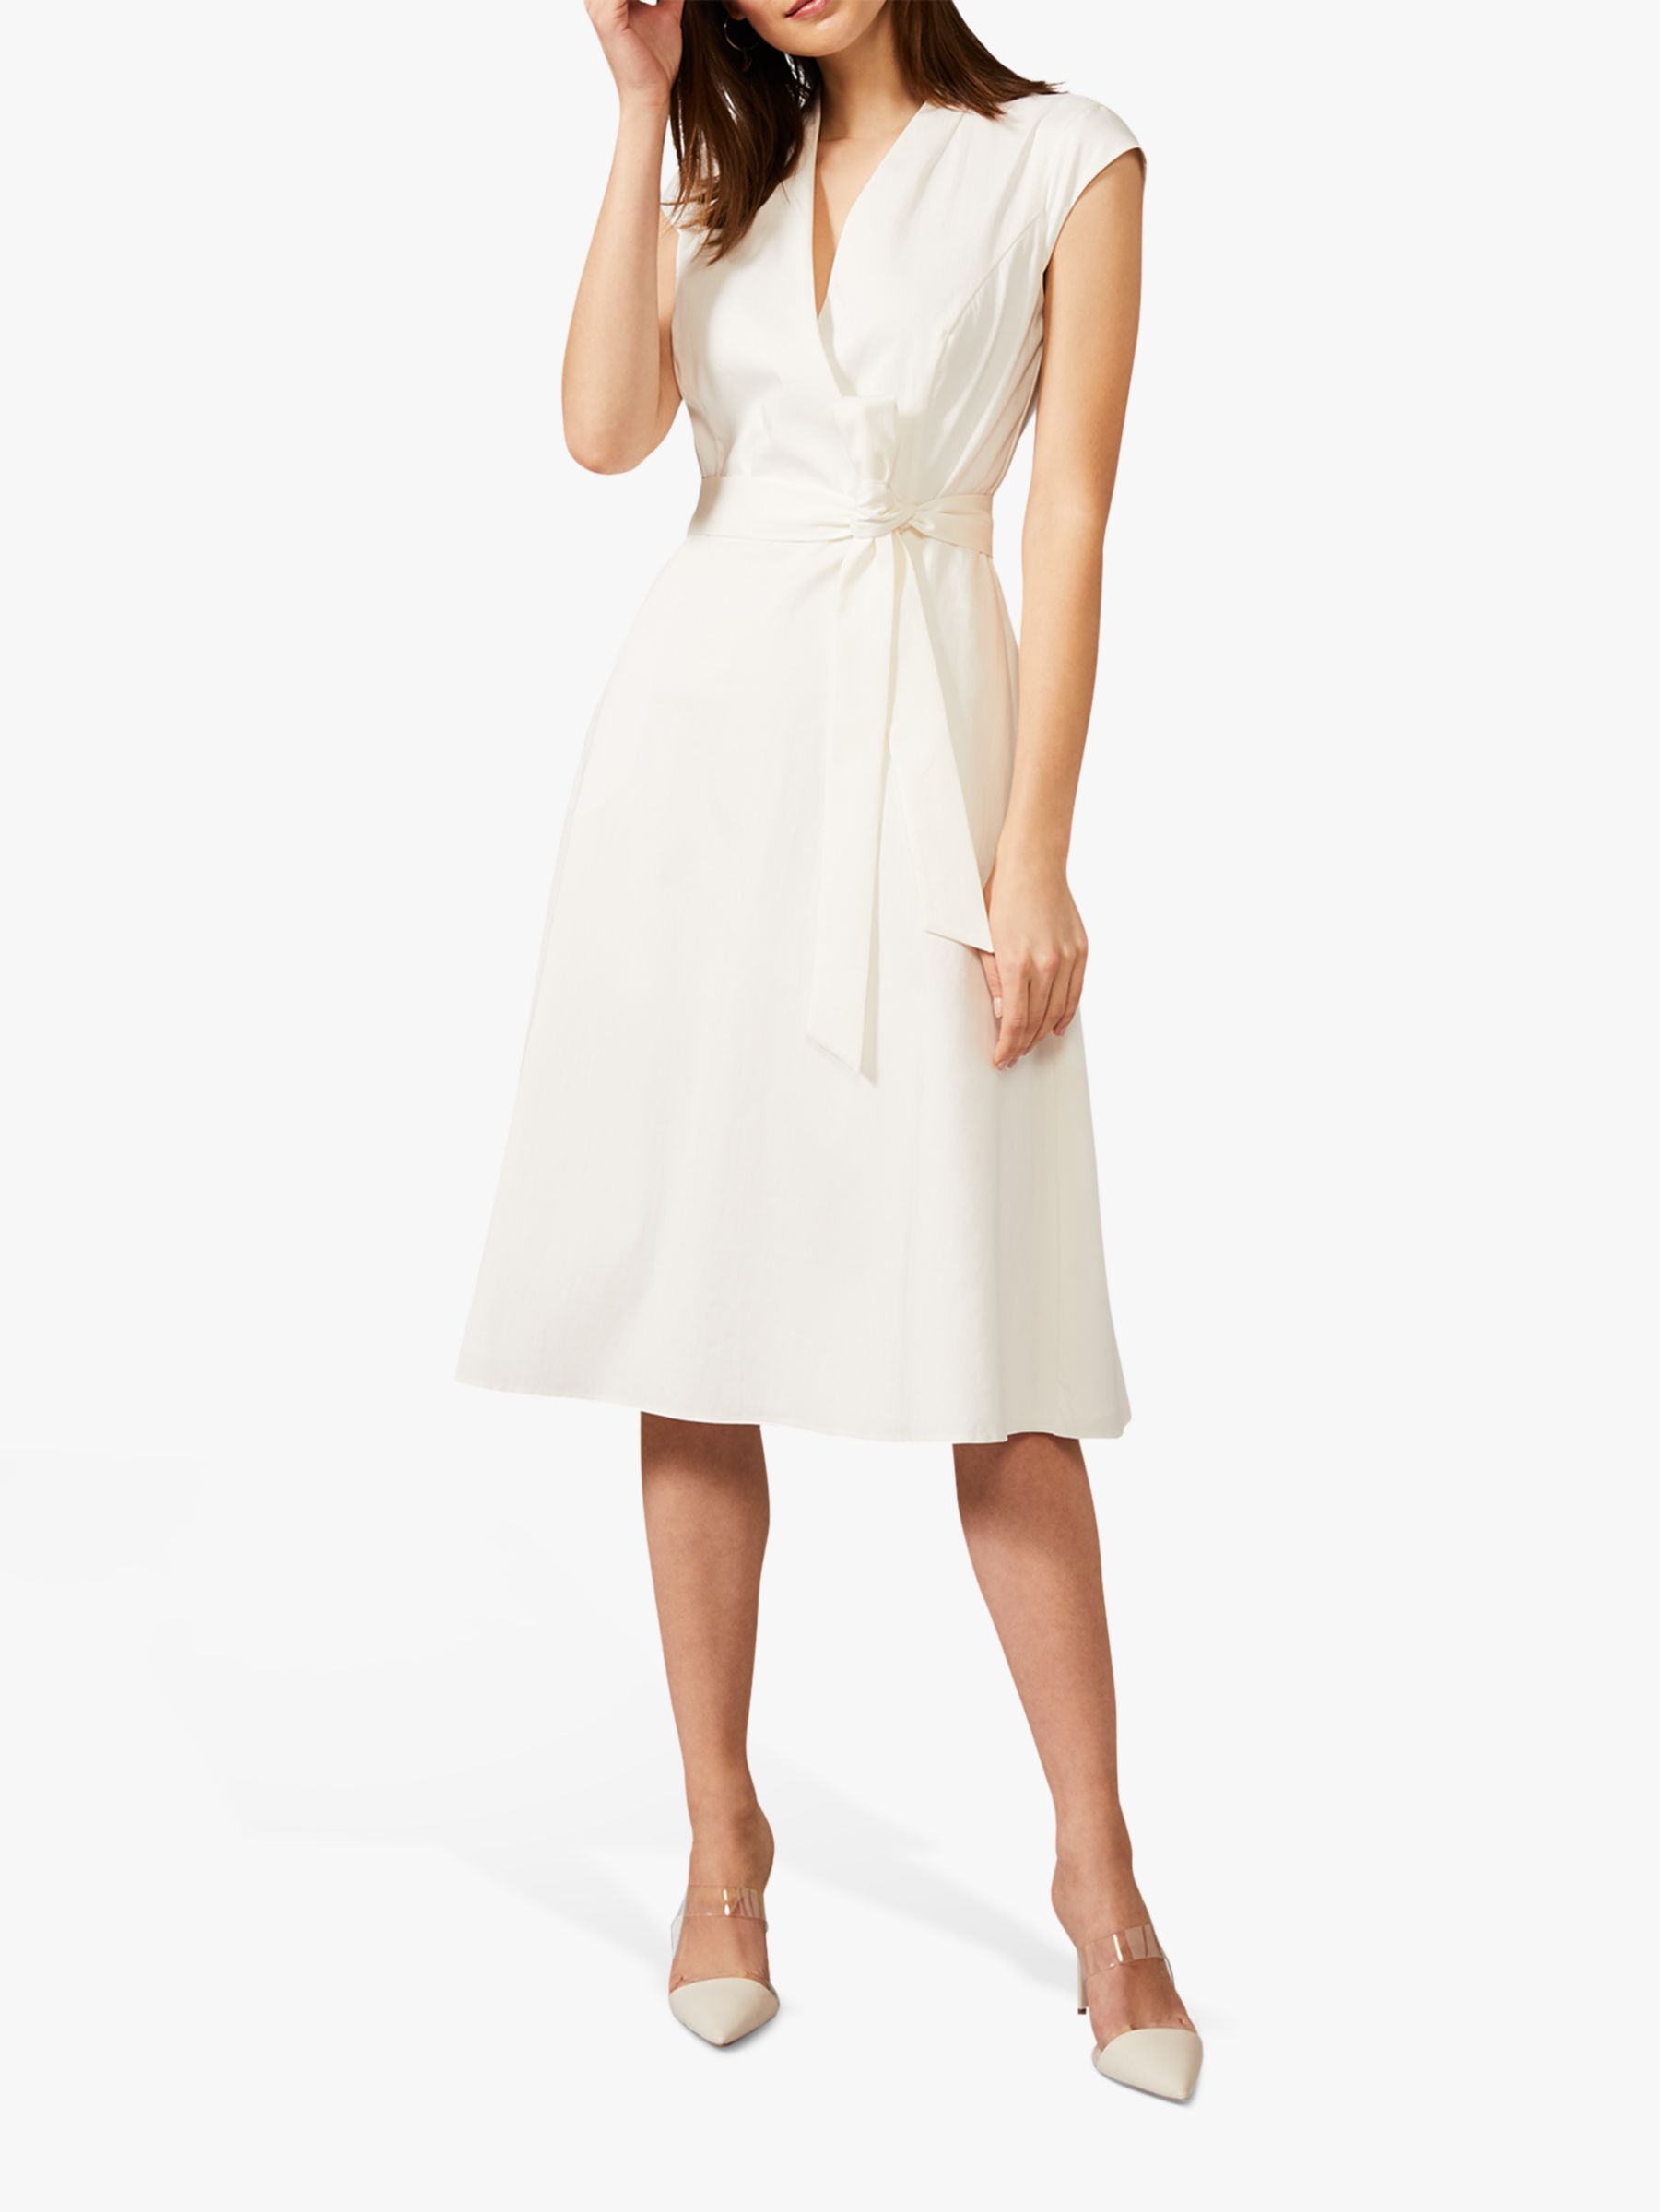 zappos mother of the bride dresses